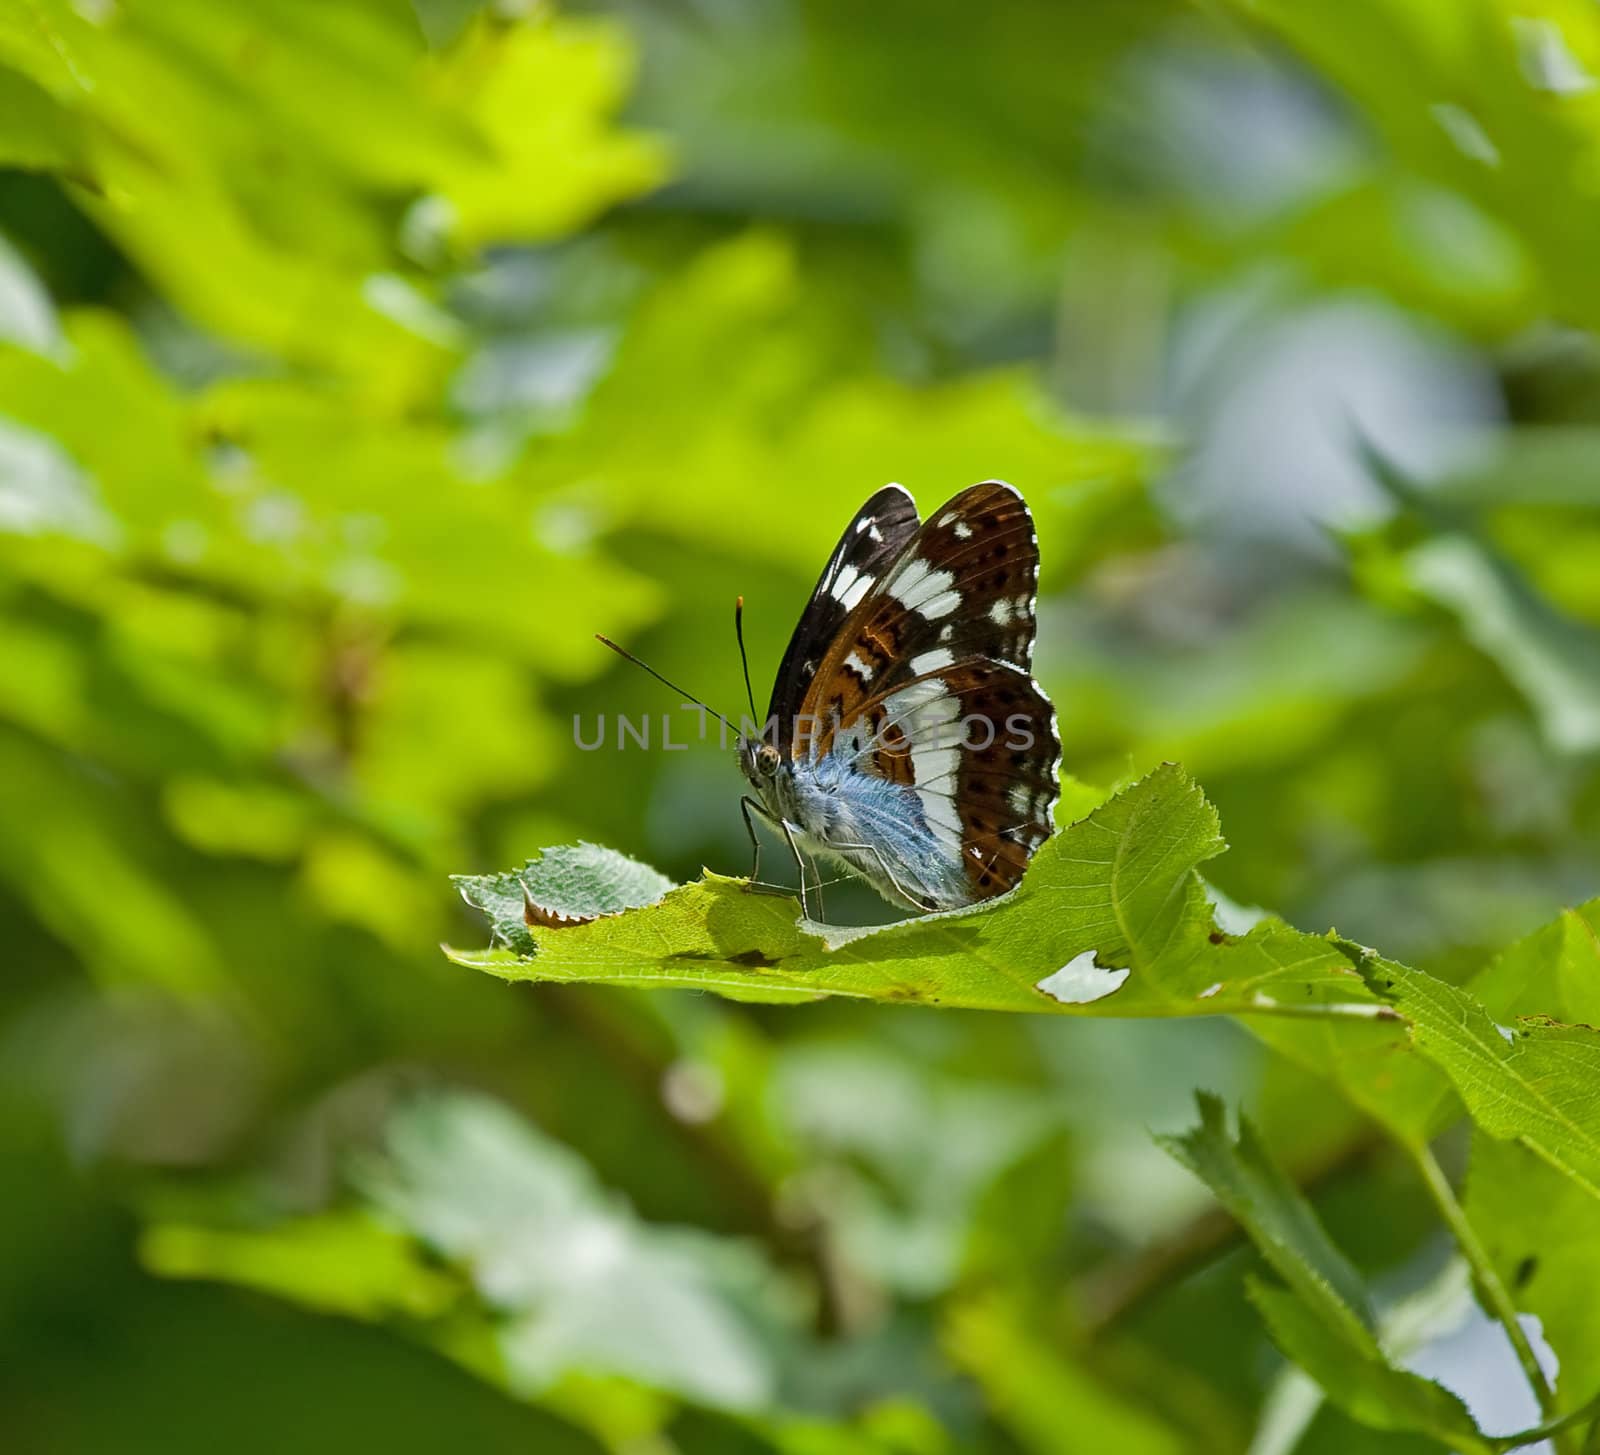 Underwing of White Admiral butterfly, taken in English woodland during June.